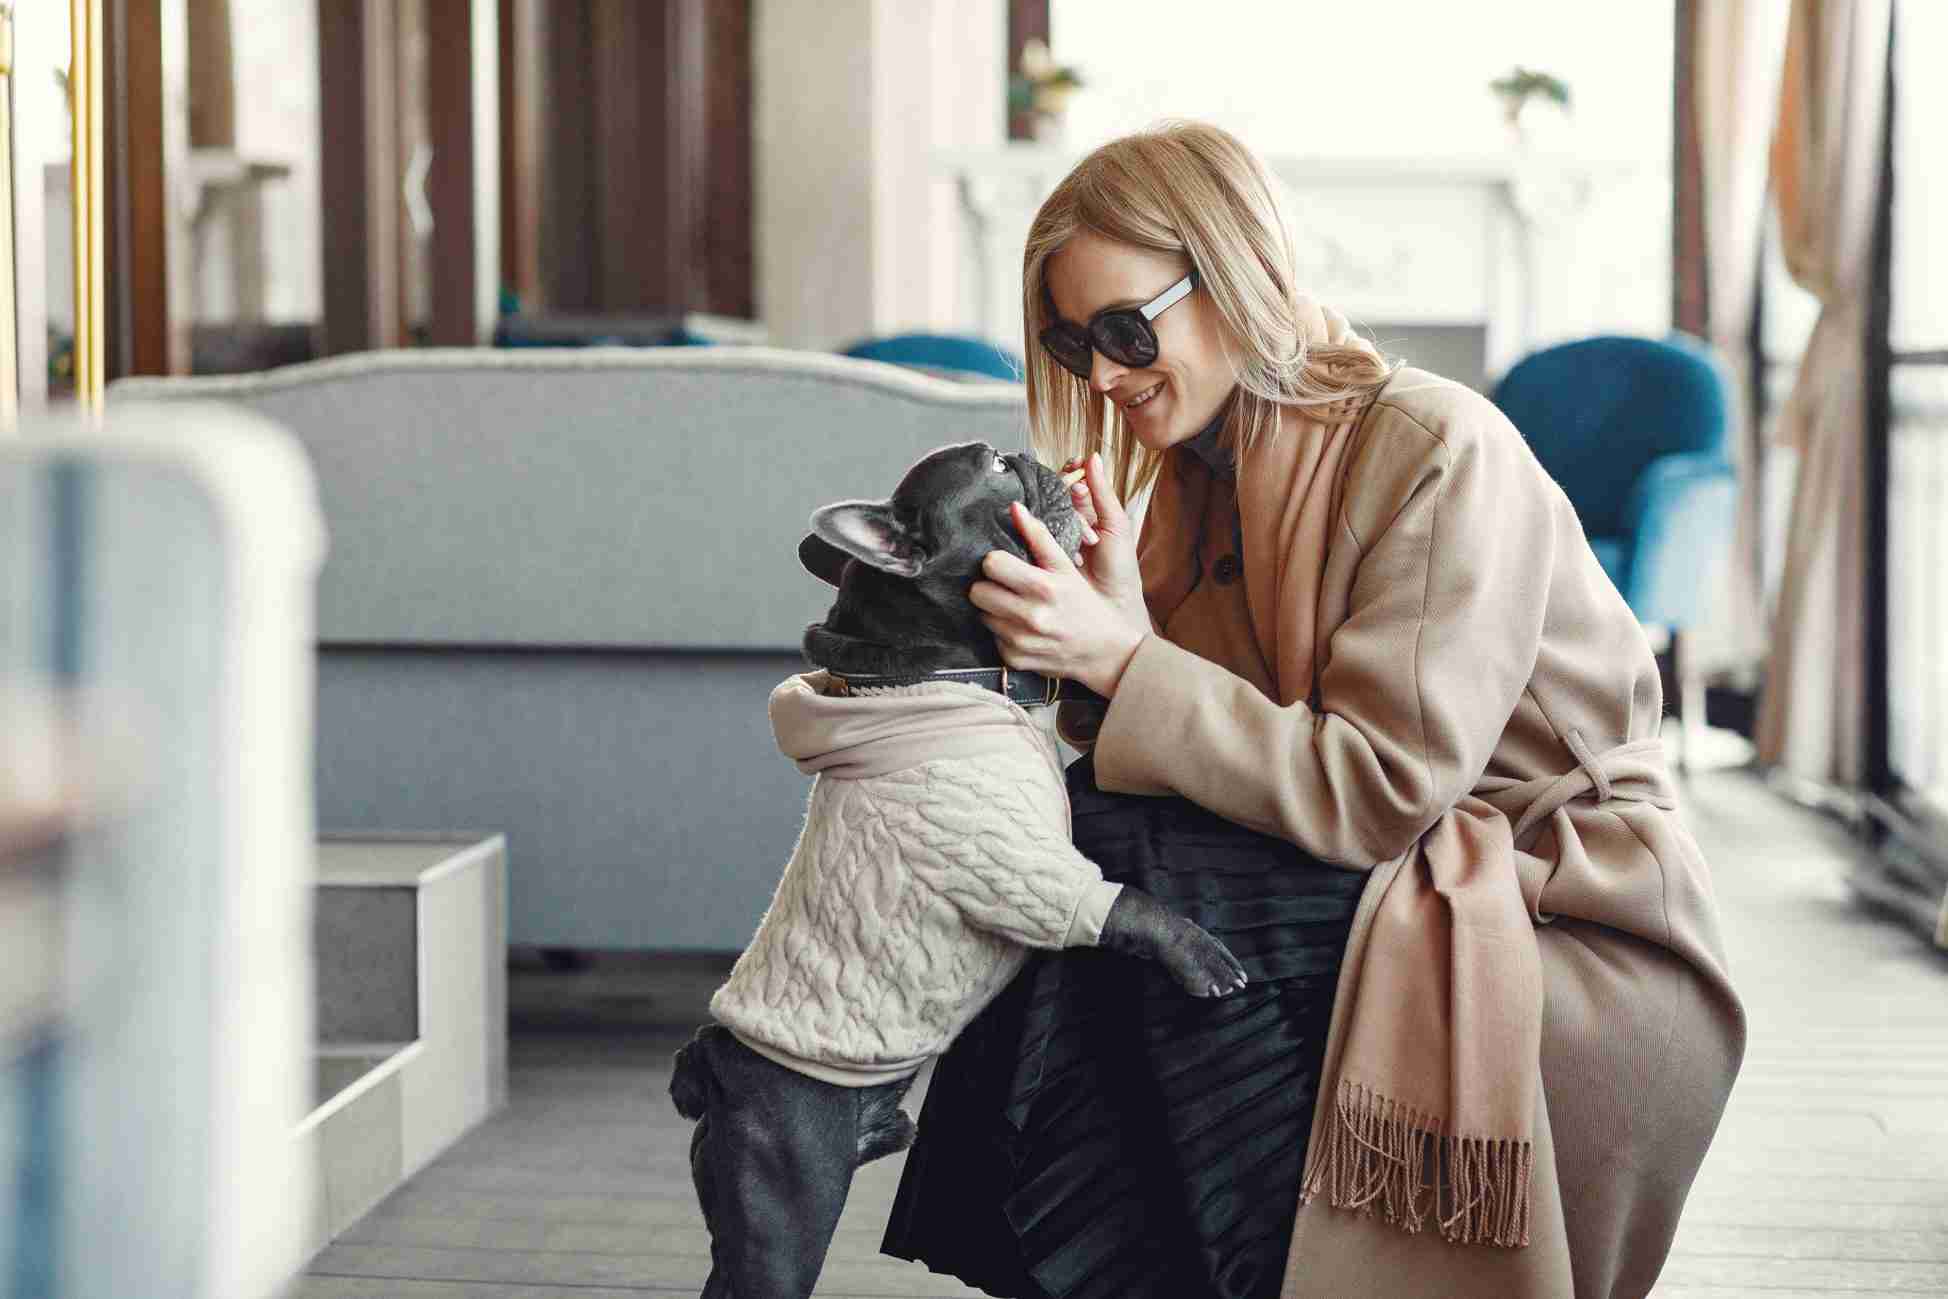 Woman with dog. Lady in a brown coat. Girl play with bulldog. Woman in a cafe.